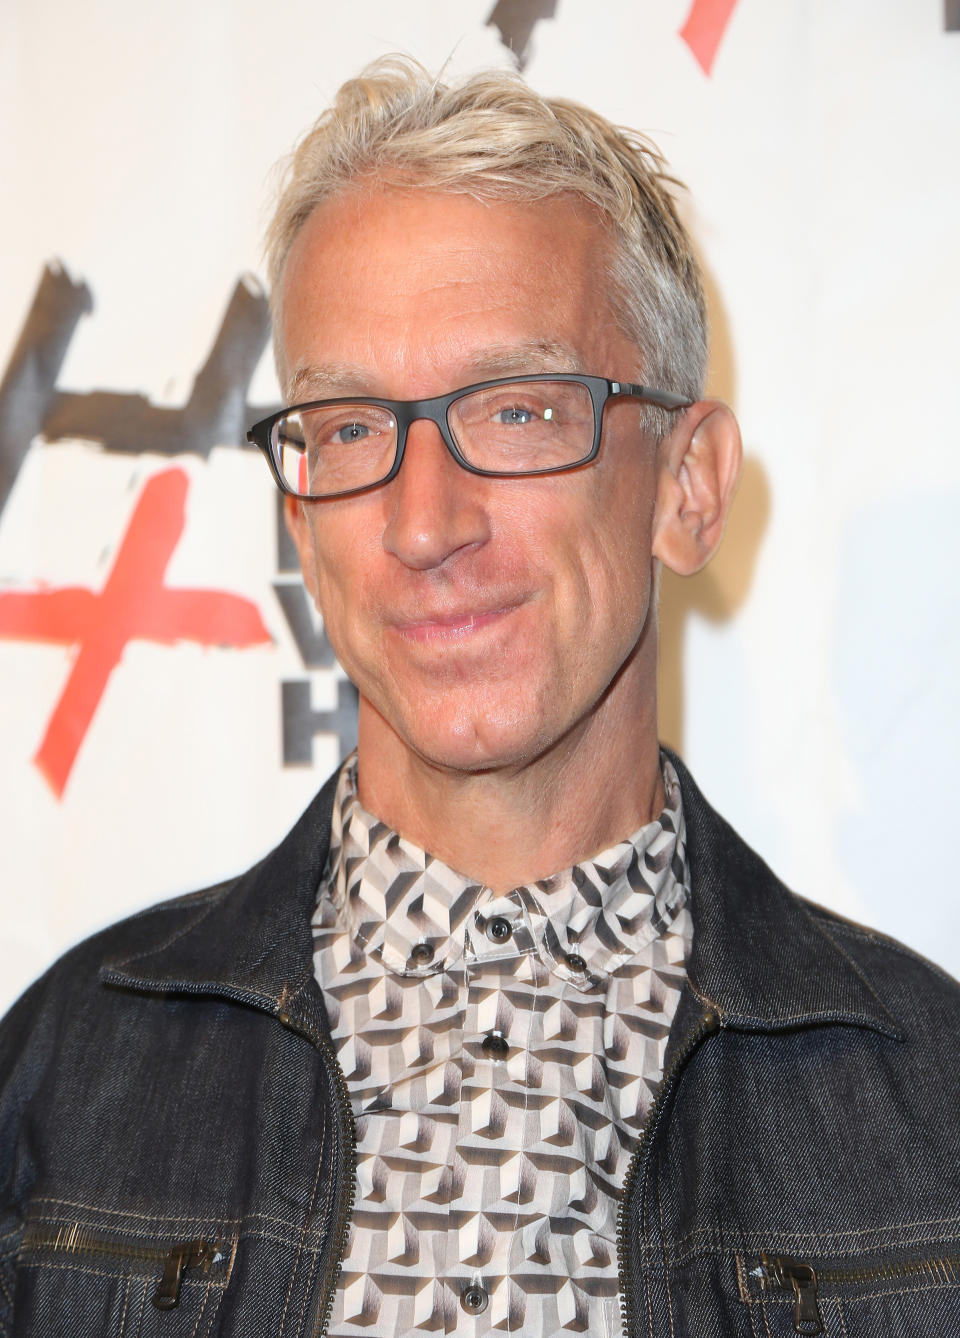 Comedian Andy Dick attends #NotWithHim Event in Los Angeles, on Aug. 19, 2016.